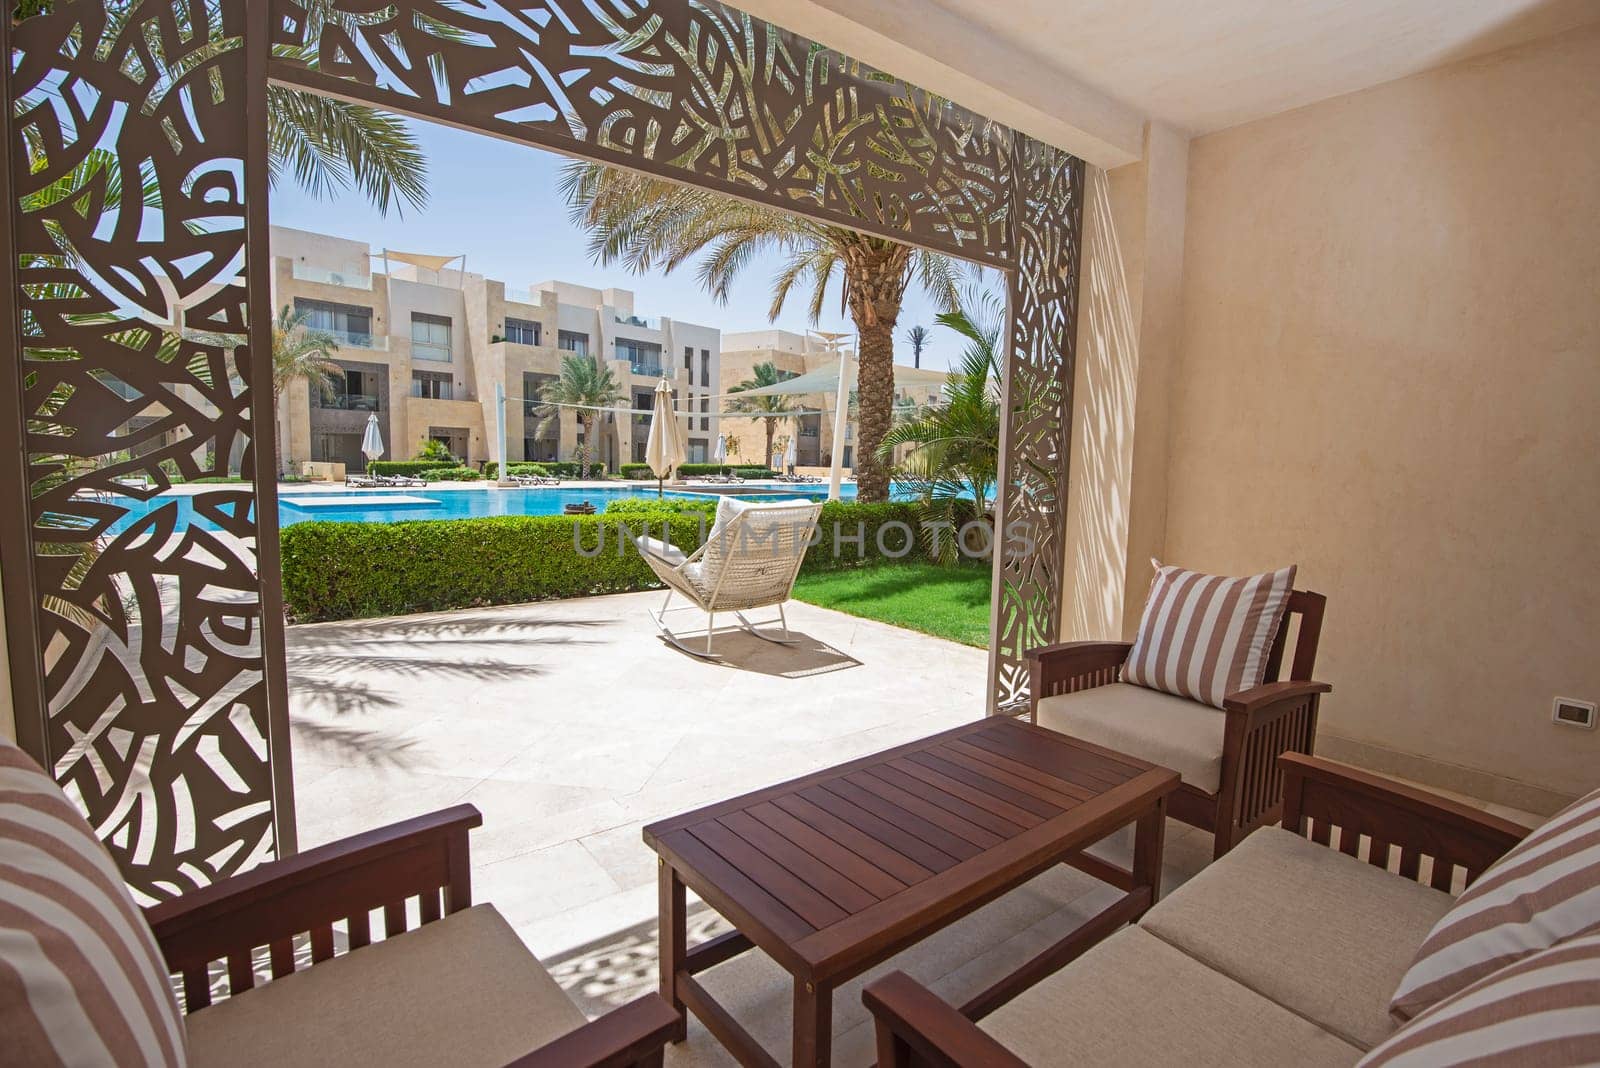 Garden patio terrace of a luxury apartment home in tropical resort with furniture and swimming pool view